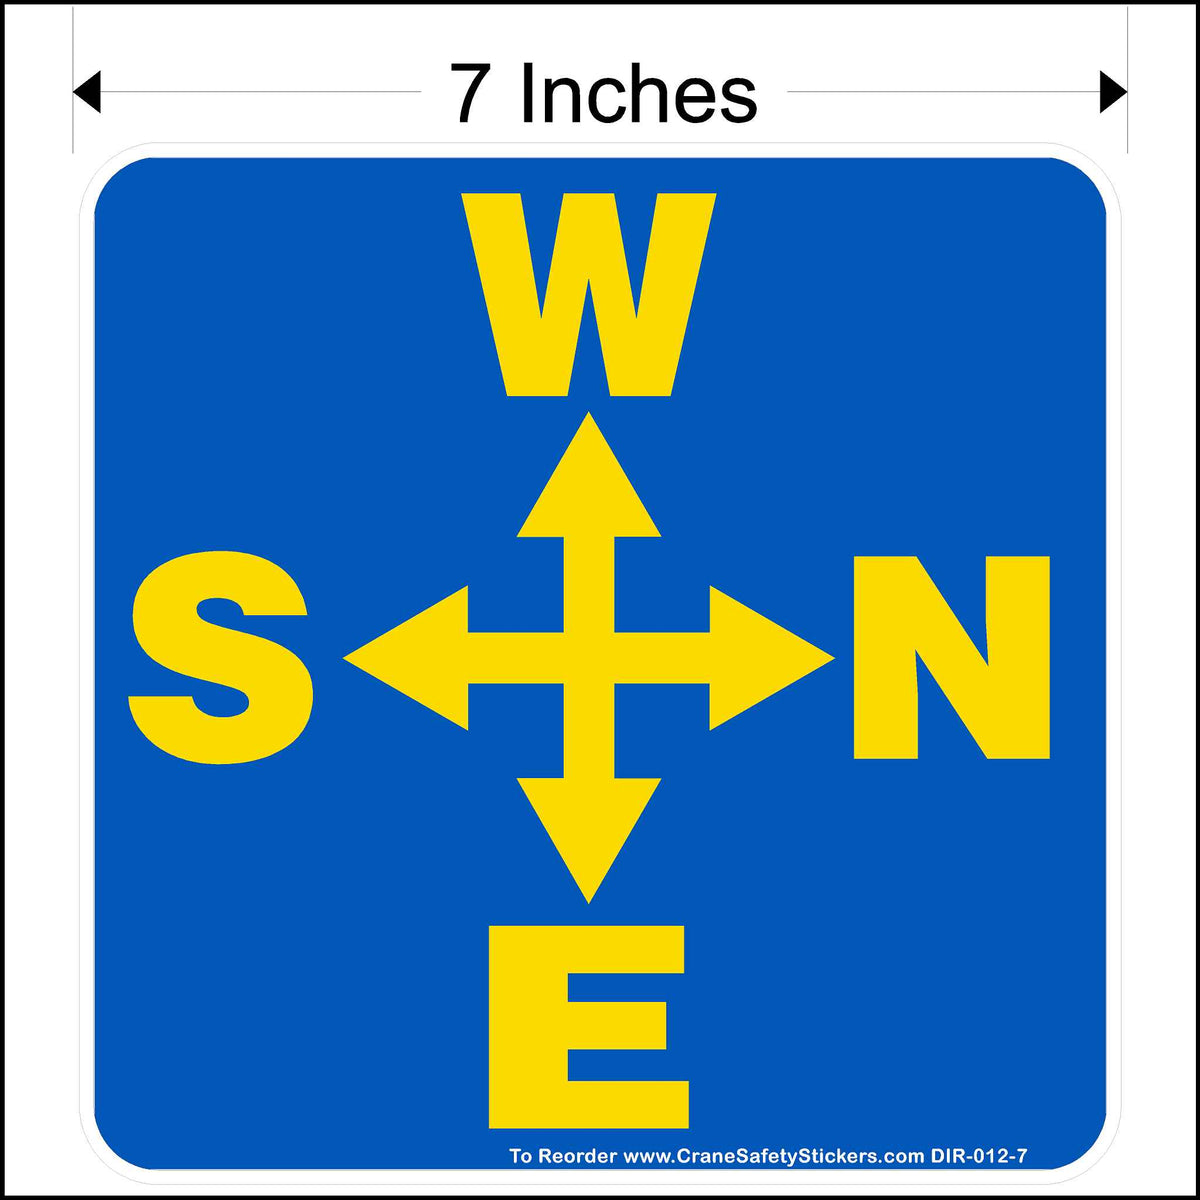 7 Inch overhead crane directional decal for the side of the crane. West, North, East, and South Arrows printed in yellow on blue background.